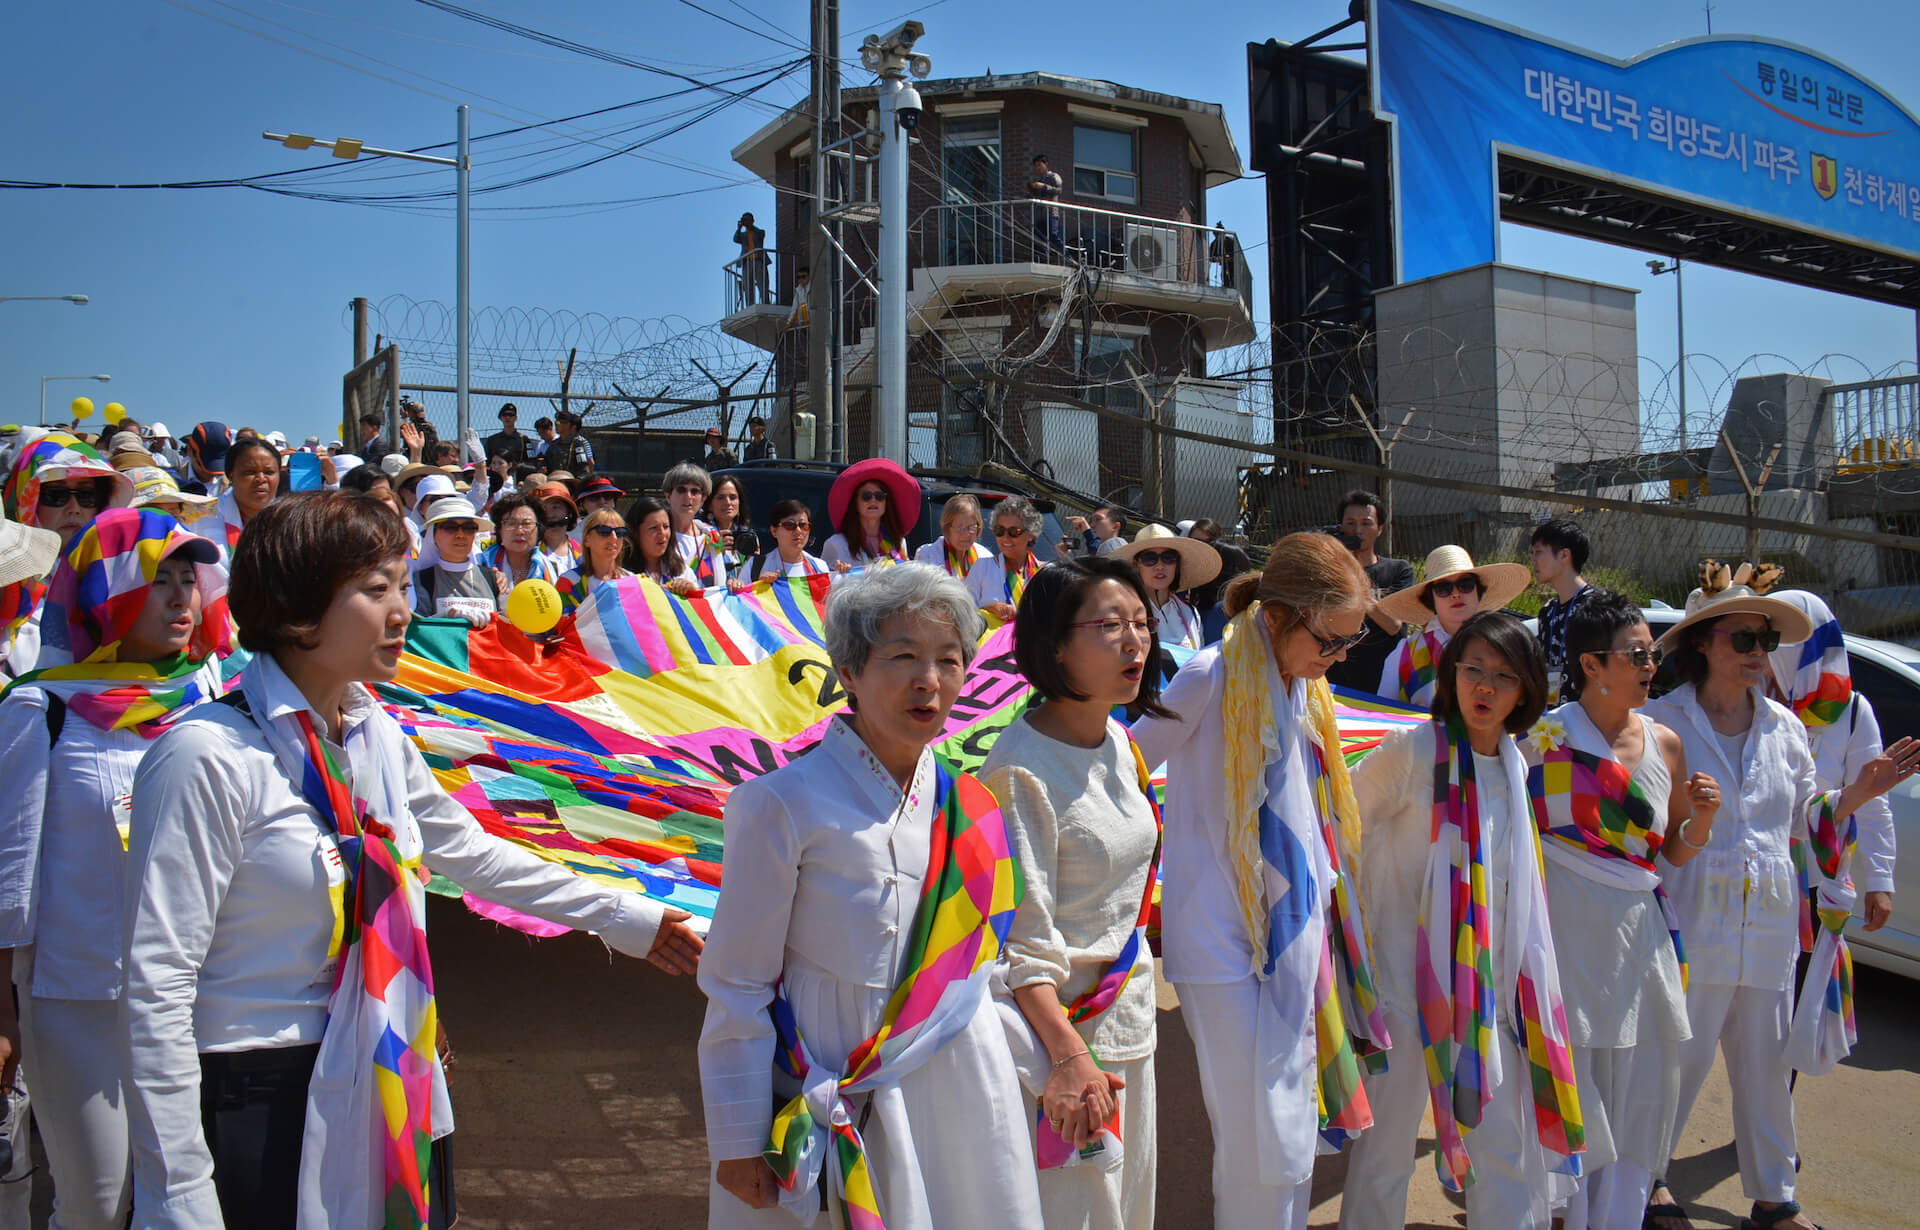 A group of many women walking dressed in white with a colorful SCARF. They hold a colorful banner. The walk past a watch tower and a wired fence.